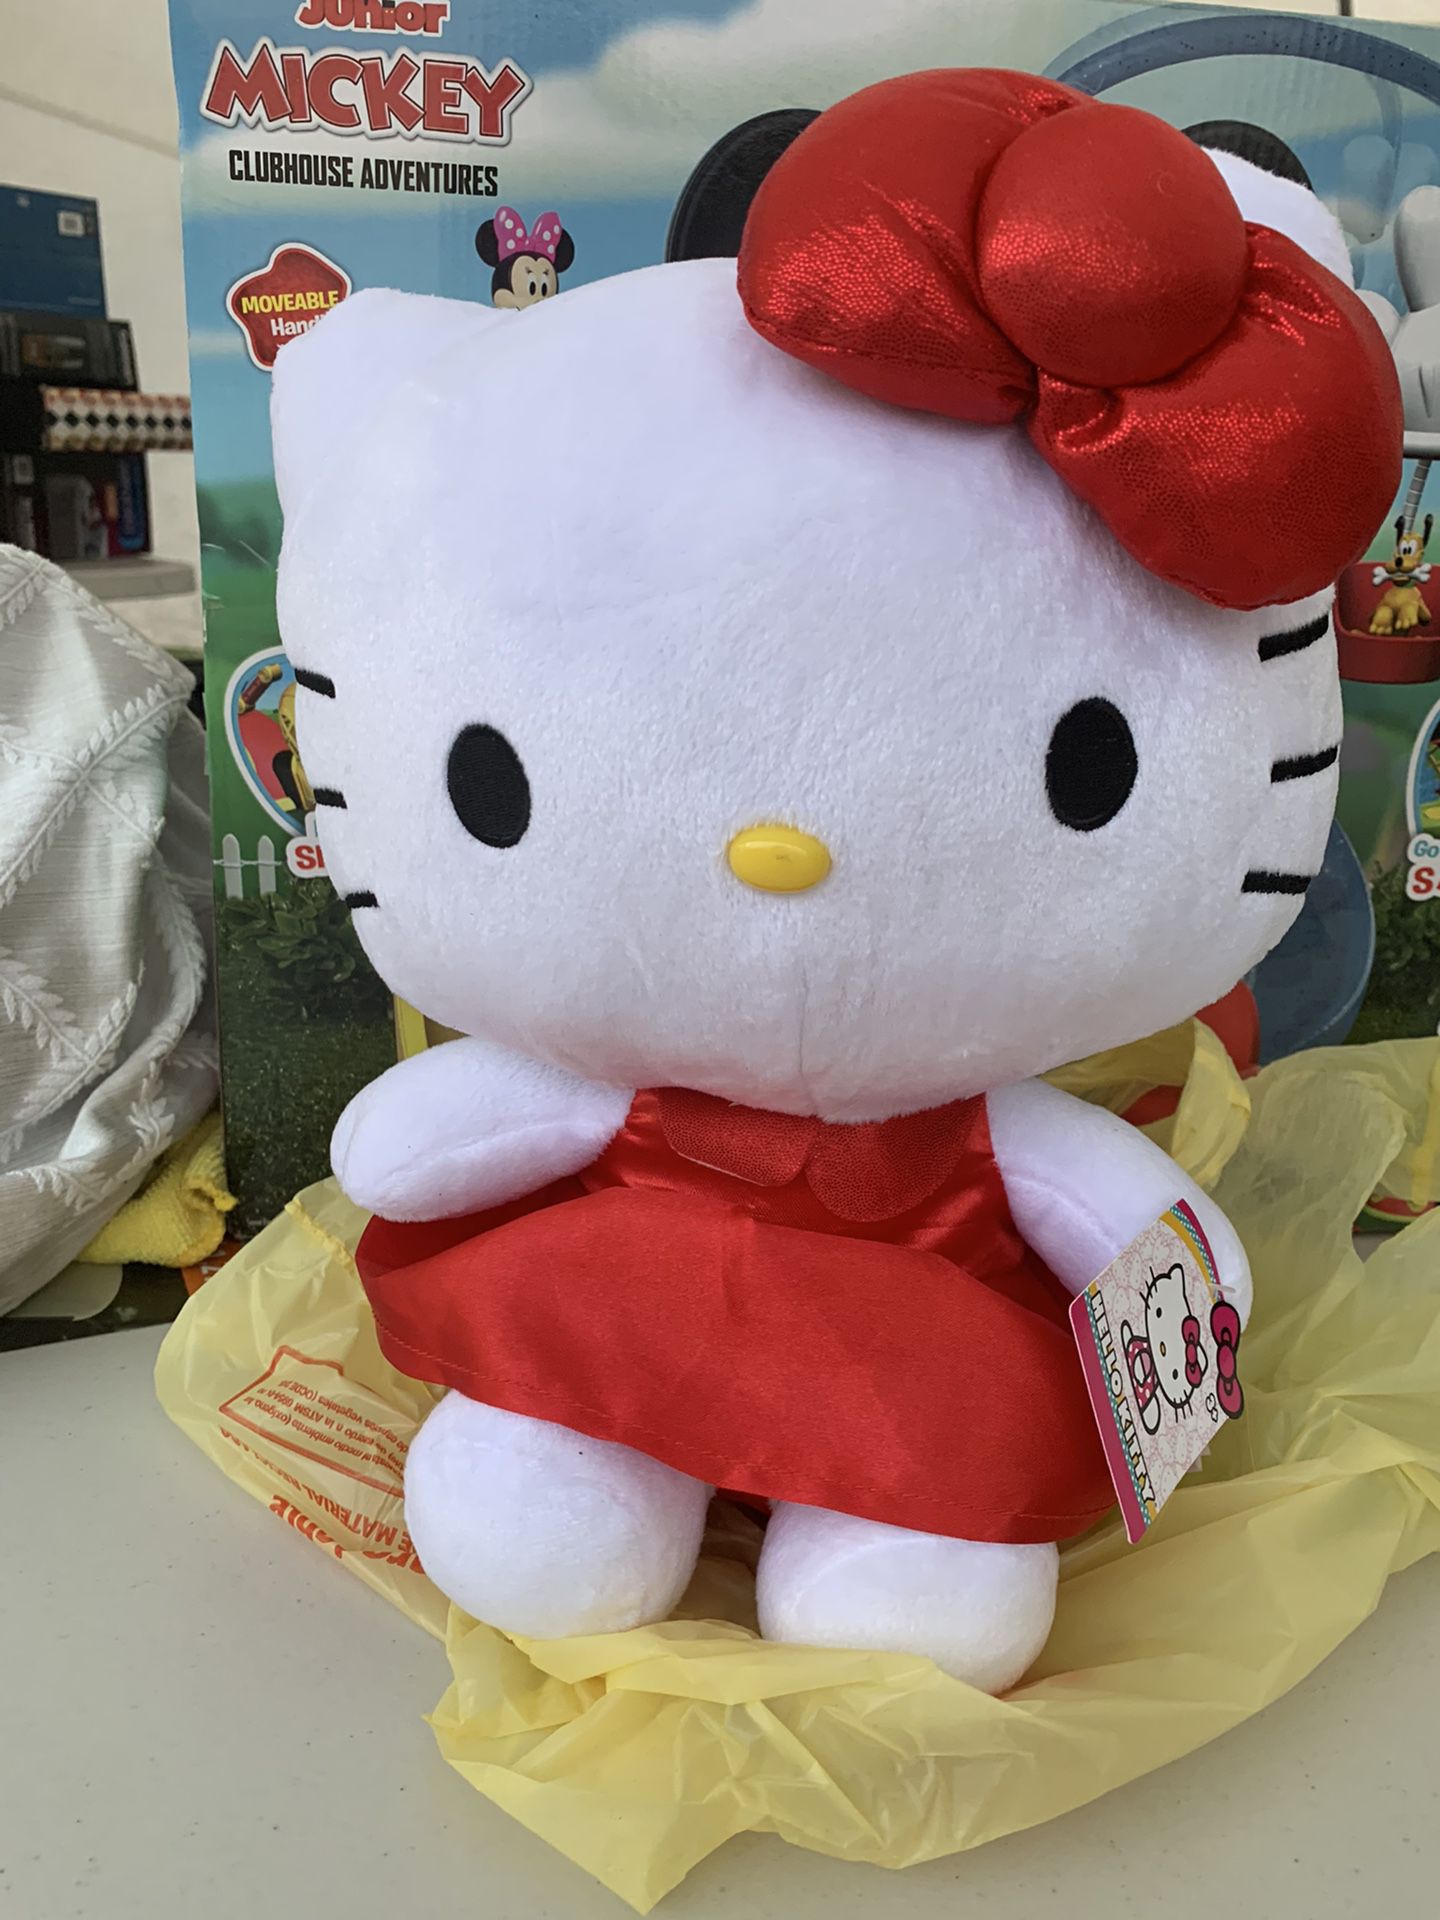 Hello Kitty in red dress 12 inch. In montebello 90640